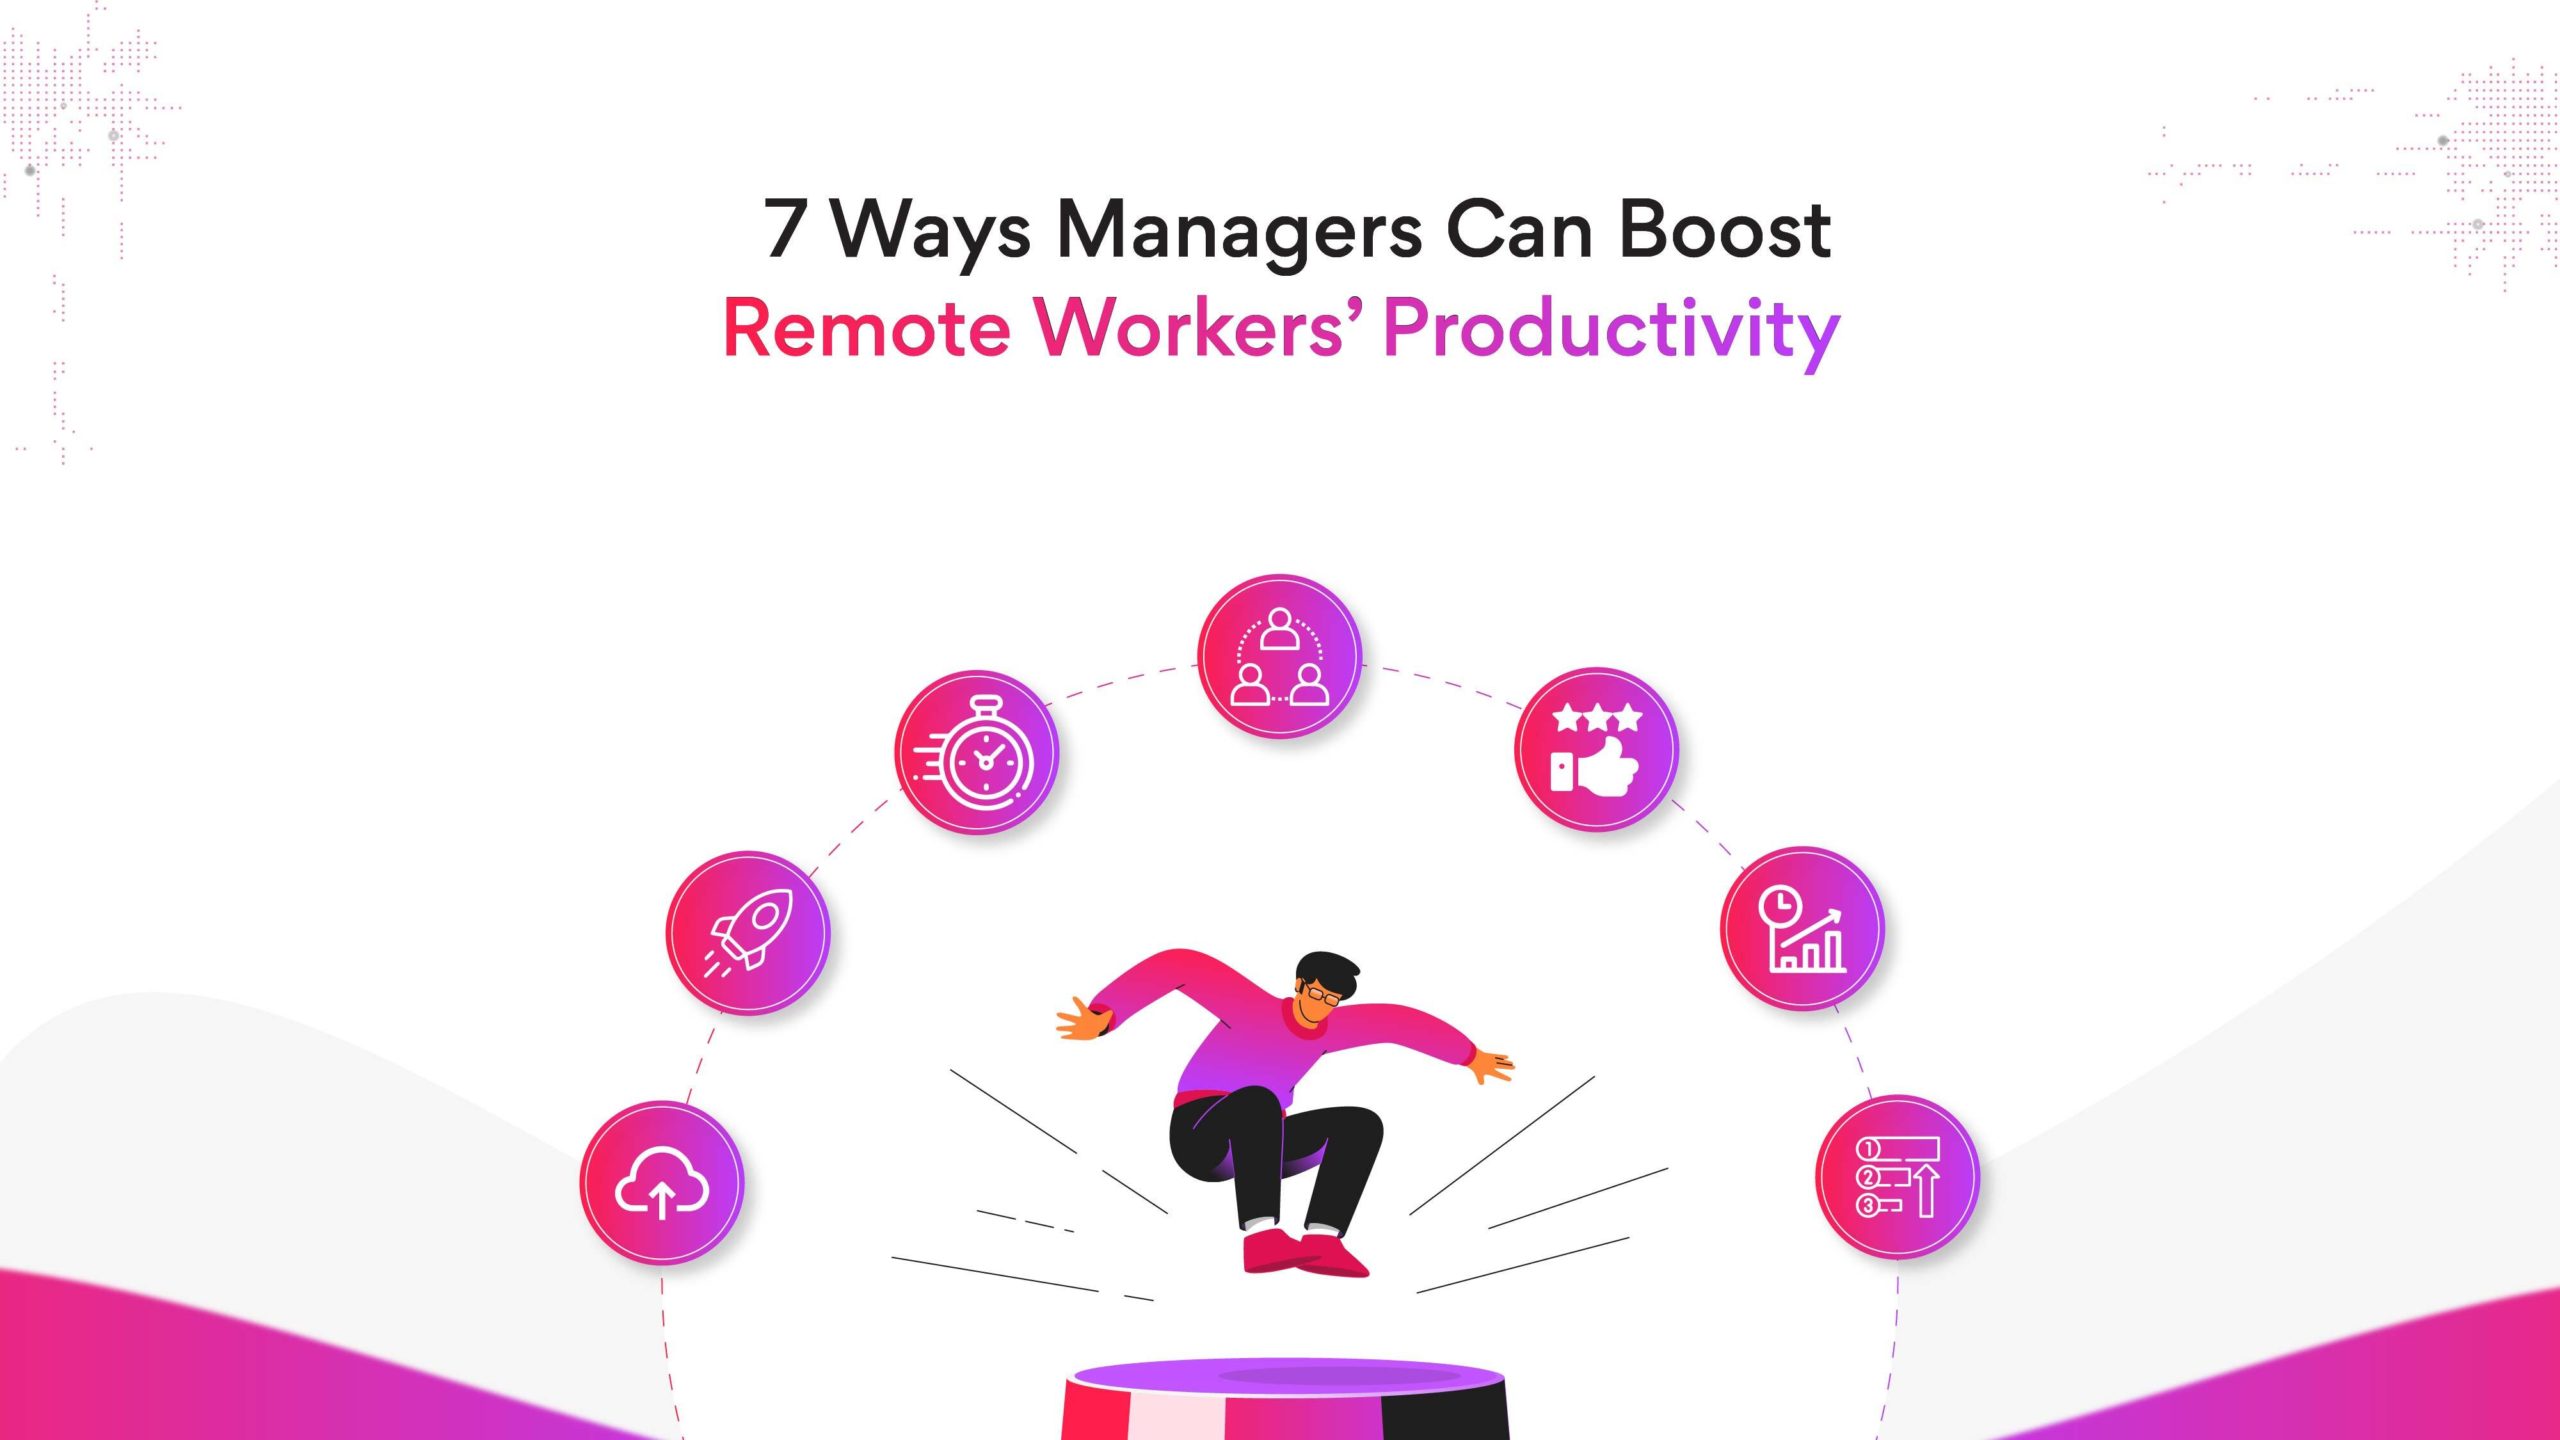 Remote Workers’ Productivity